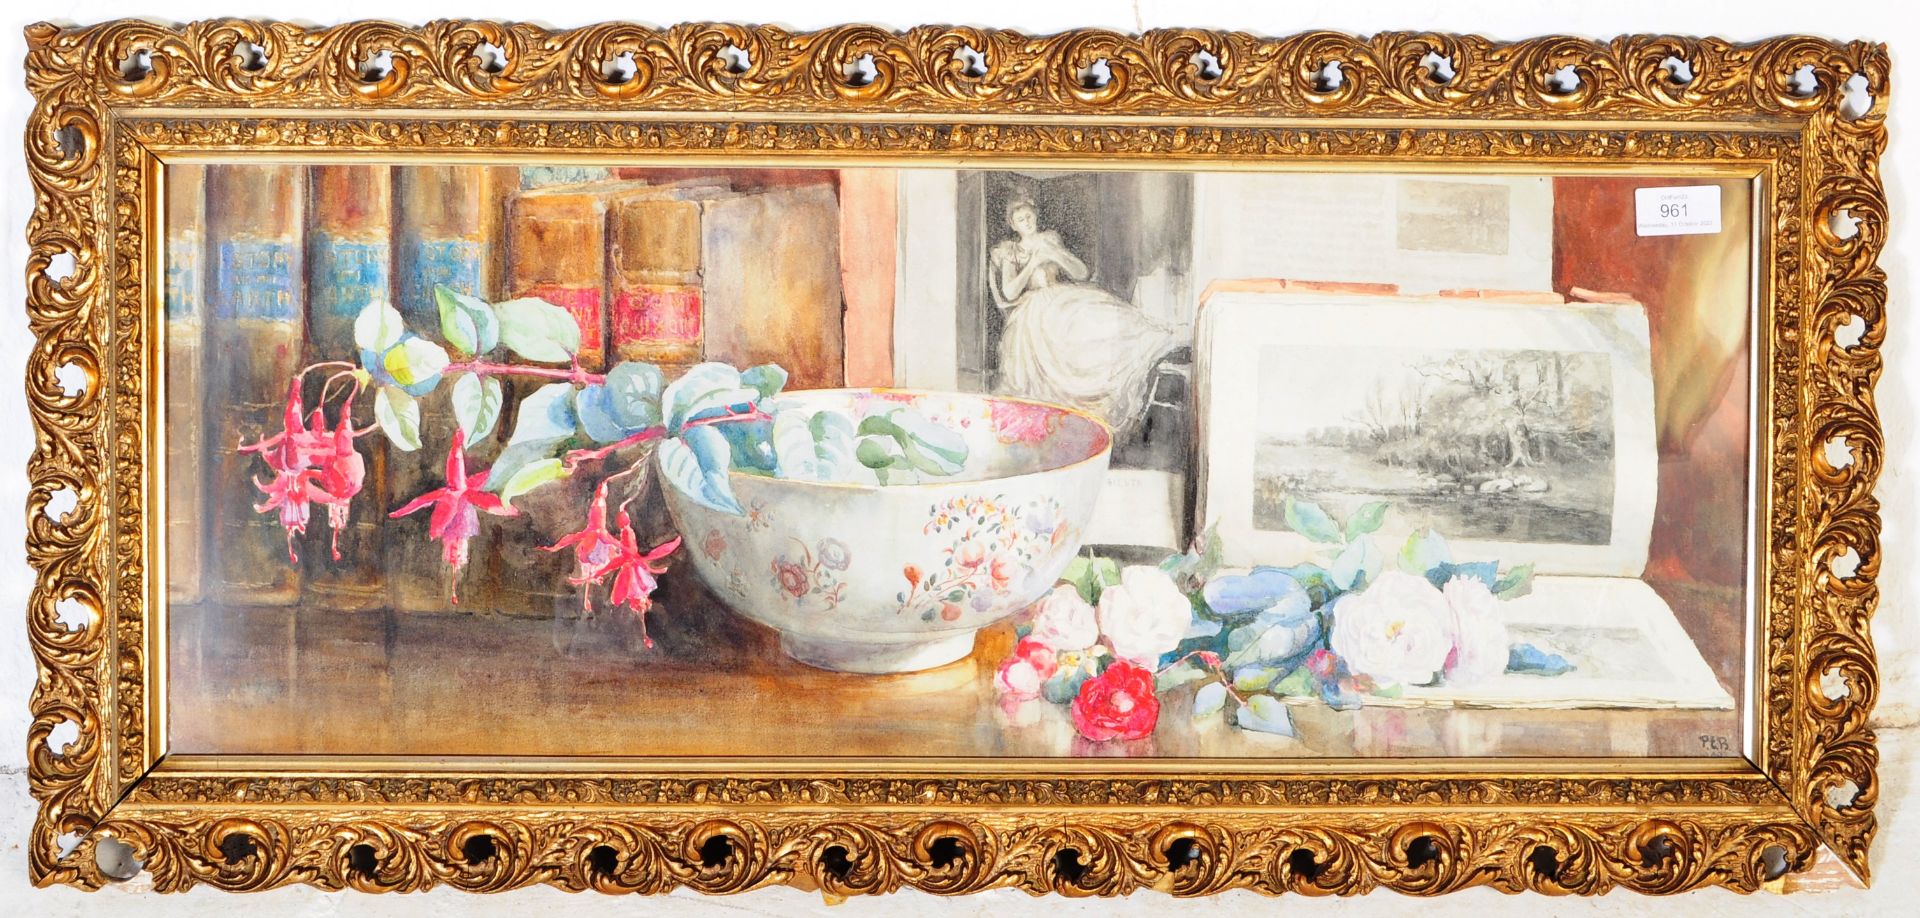 EARLY 20TH CENTURY PATIENCE E BISHOP WATERCOLOR STILL LIFE